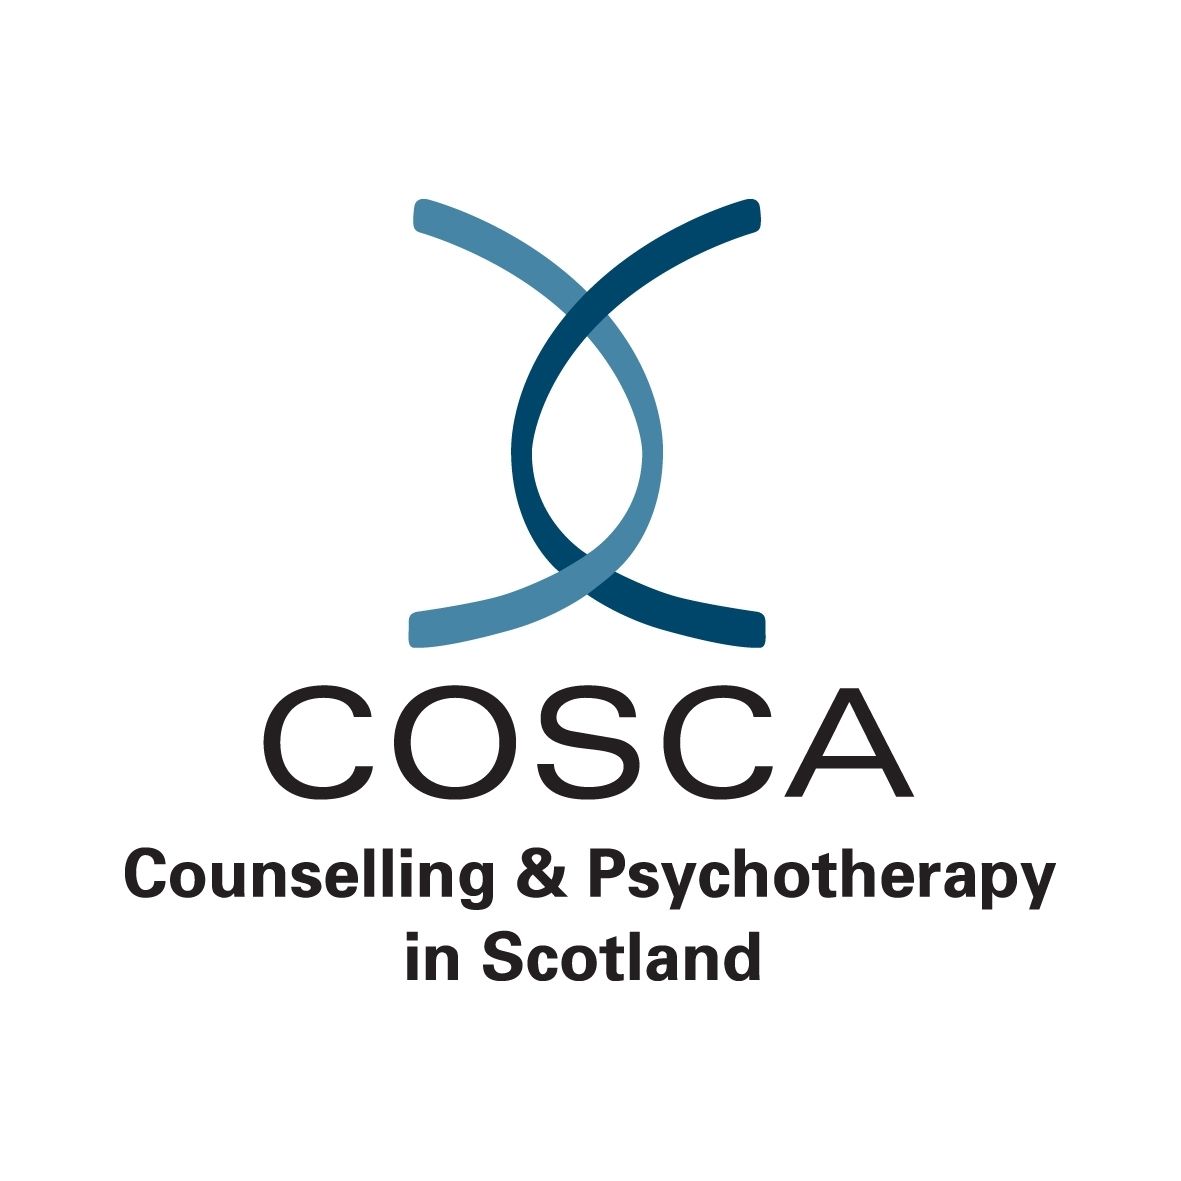 COSCA (Counselling & Psychotherapy in Scotland) Logo